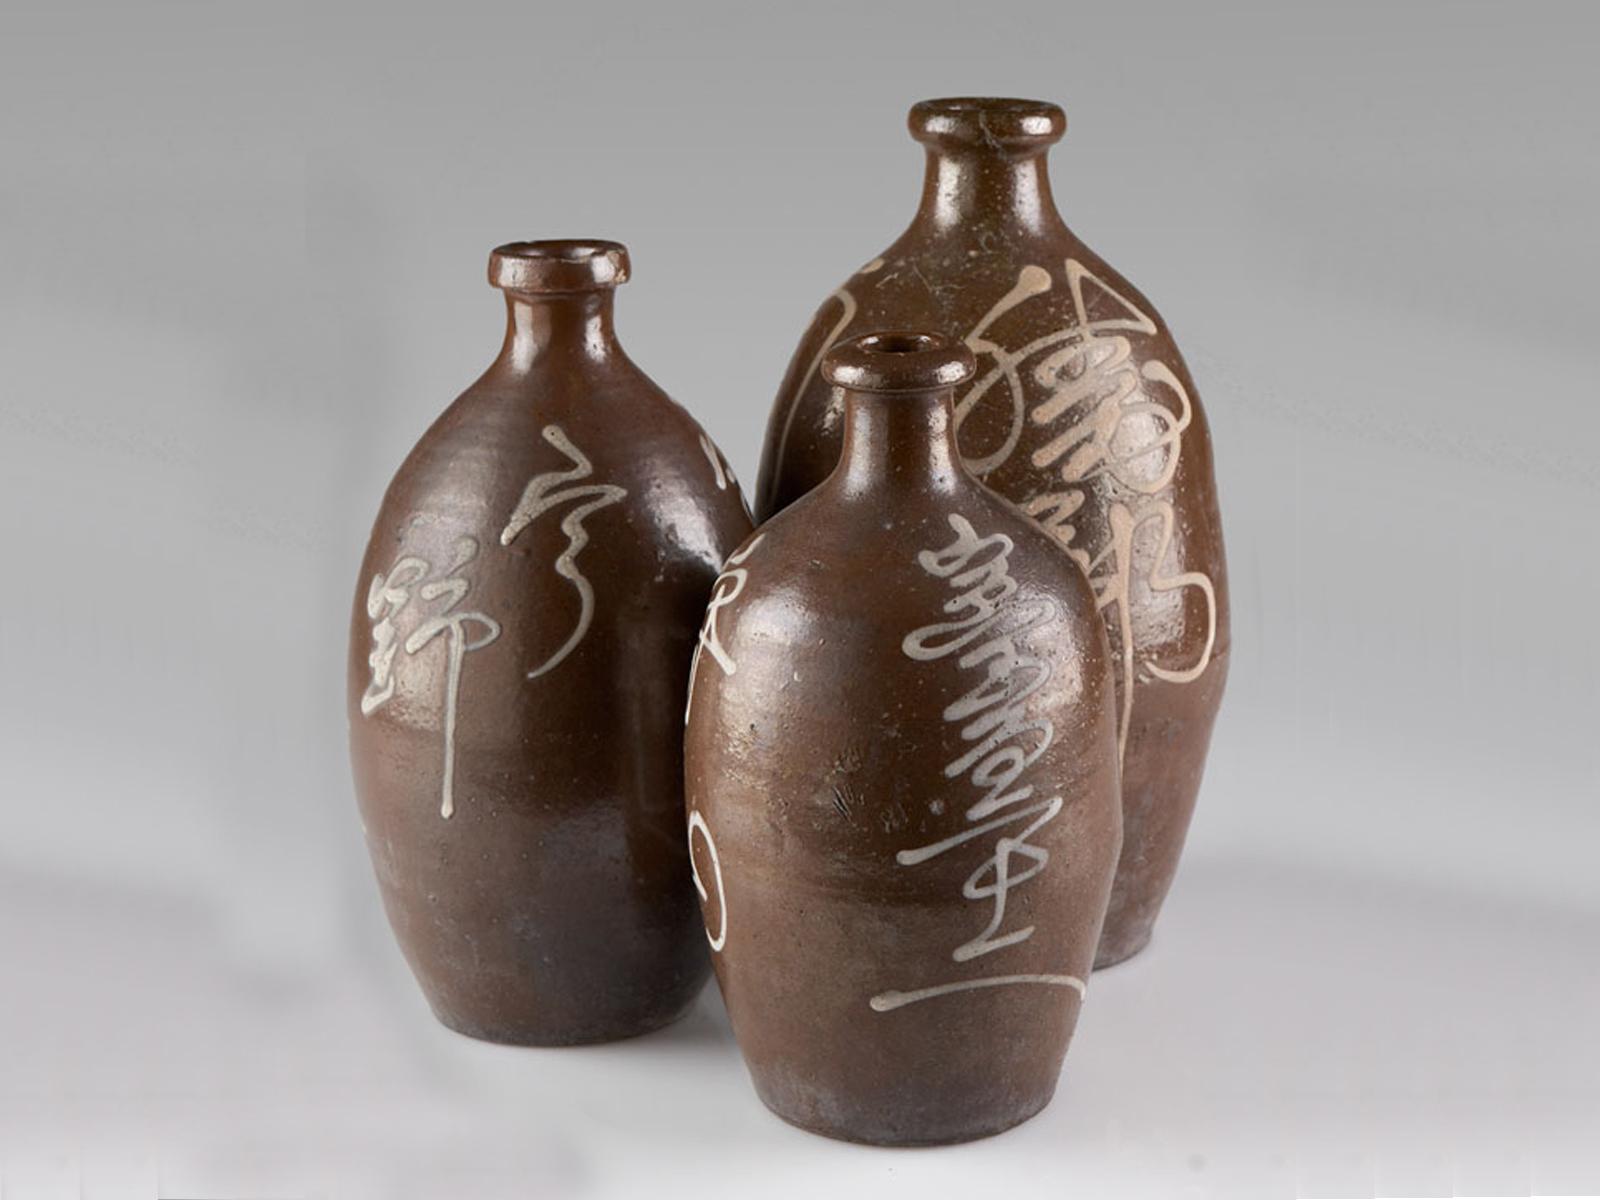 A trio of antique Japanese handmade earthenware saki sake bottles from Japan, circa 1900. Each jar has a different signature in script across the front that is the mark of the master saki maker responsible for the contents. The thick rim was sealed